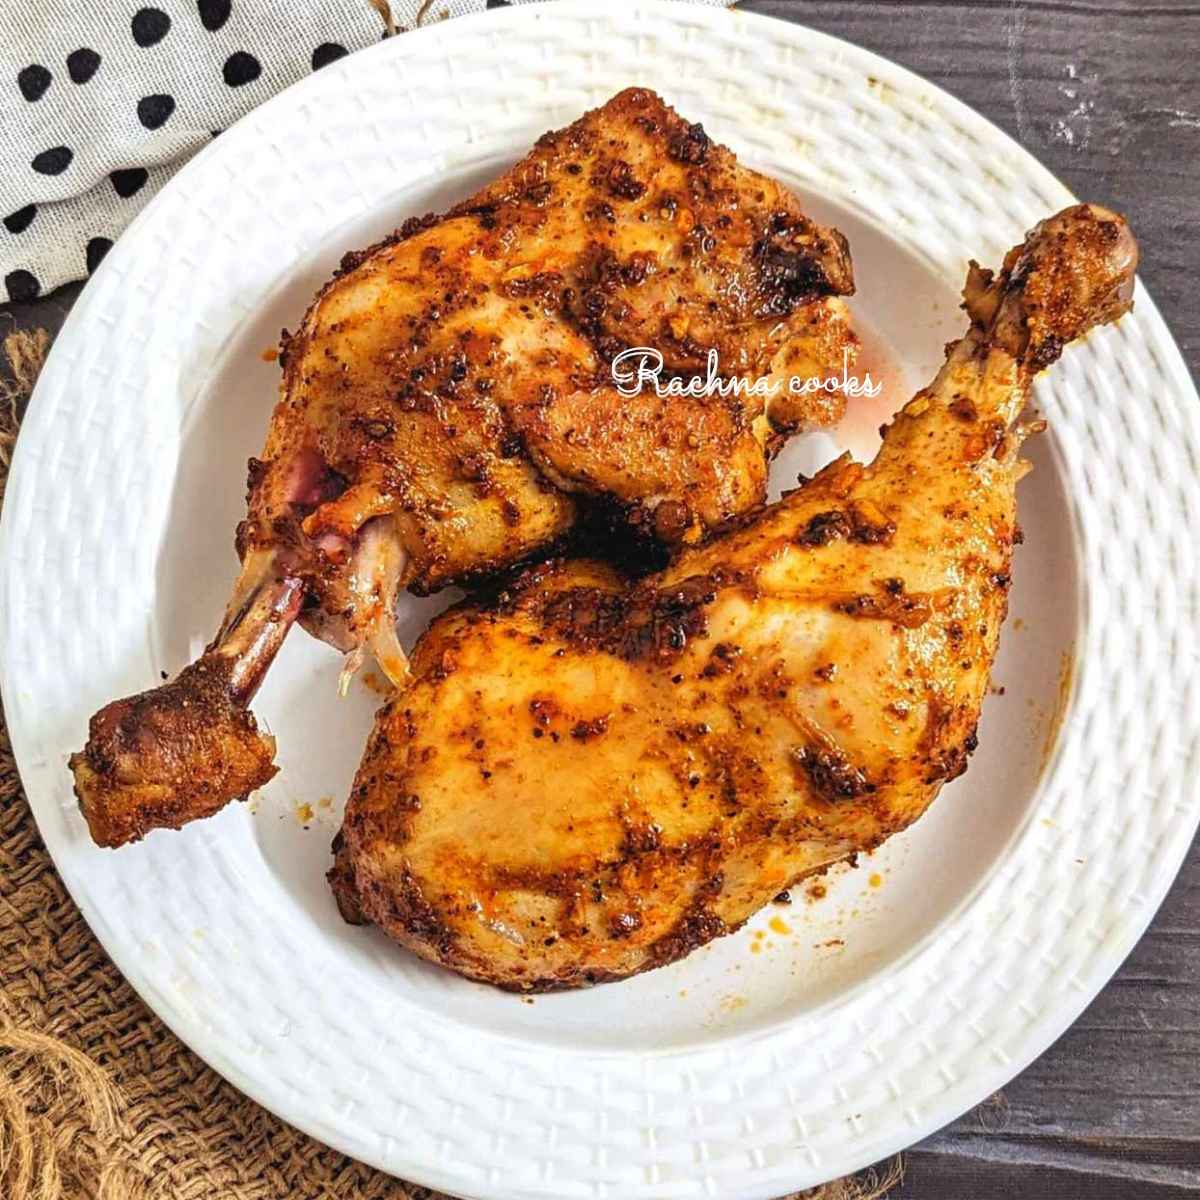 Two chicken leg quarters after air frying served on a white plate.